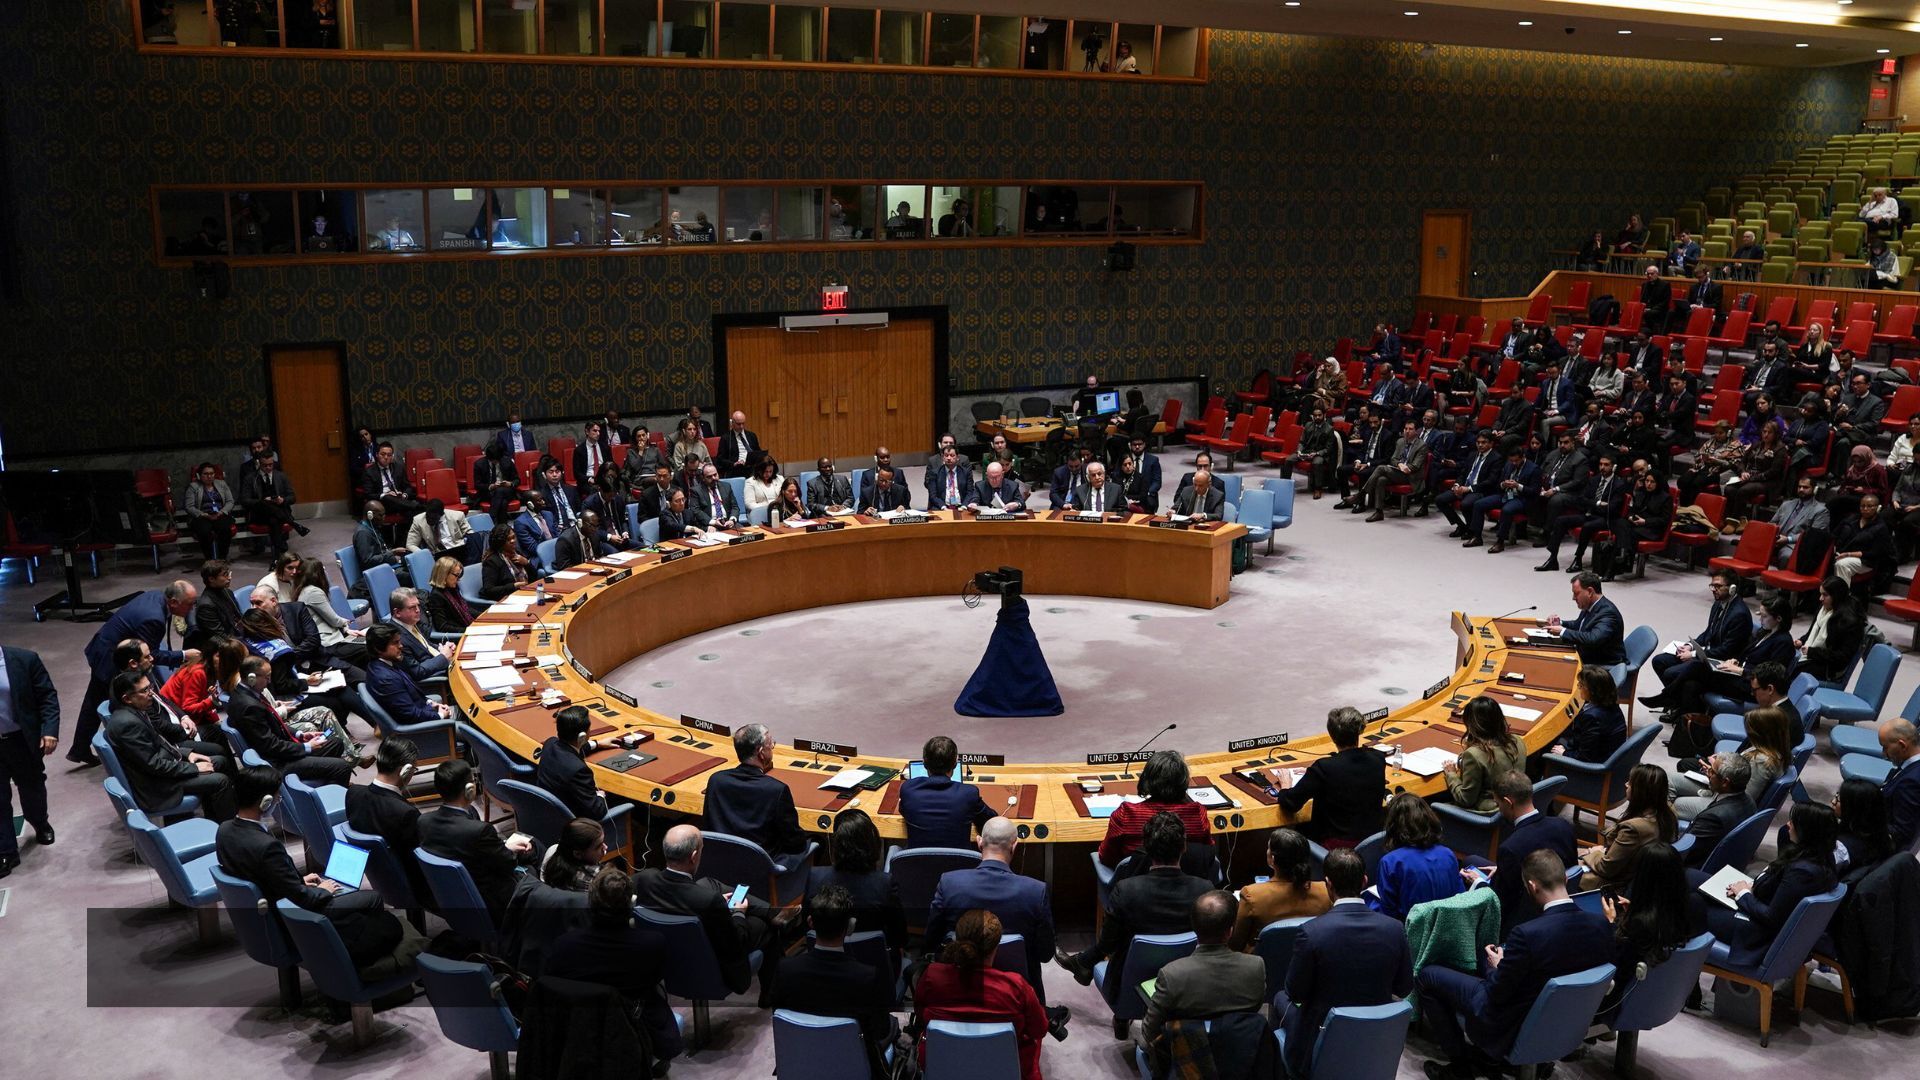 will-motion-passed-by-un-security-council-on-gaza-have-any-impact?